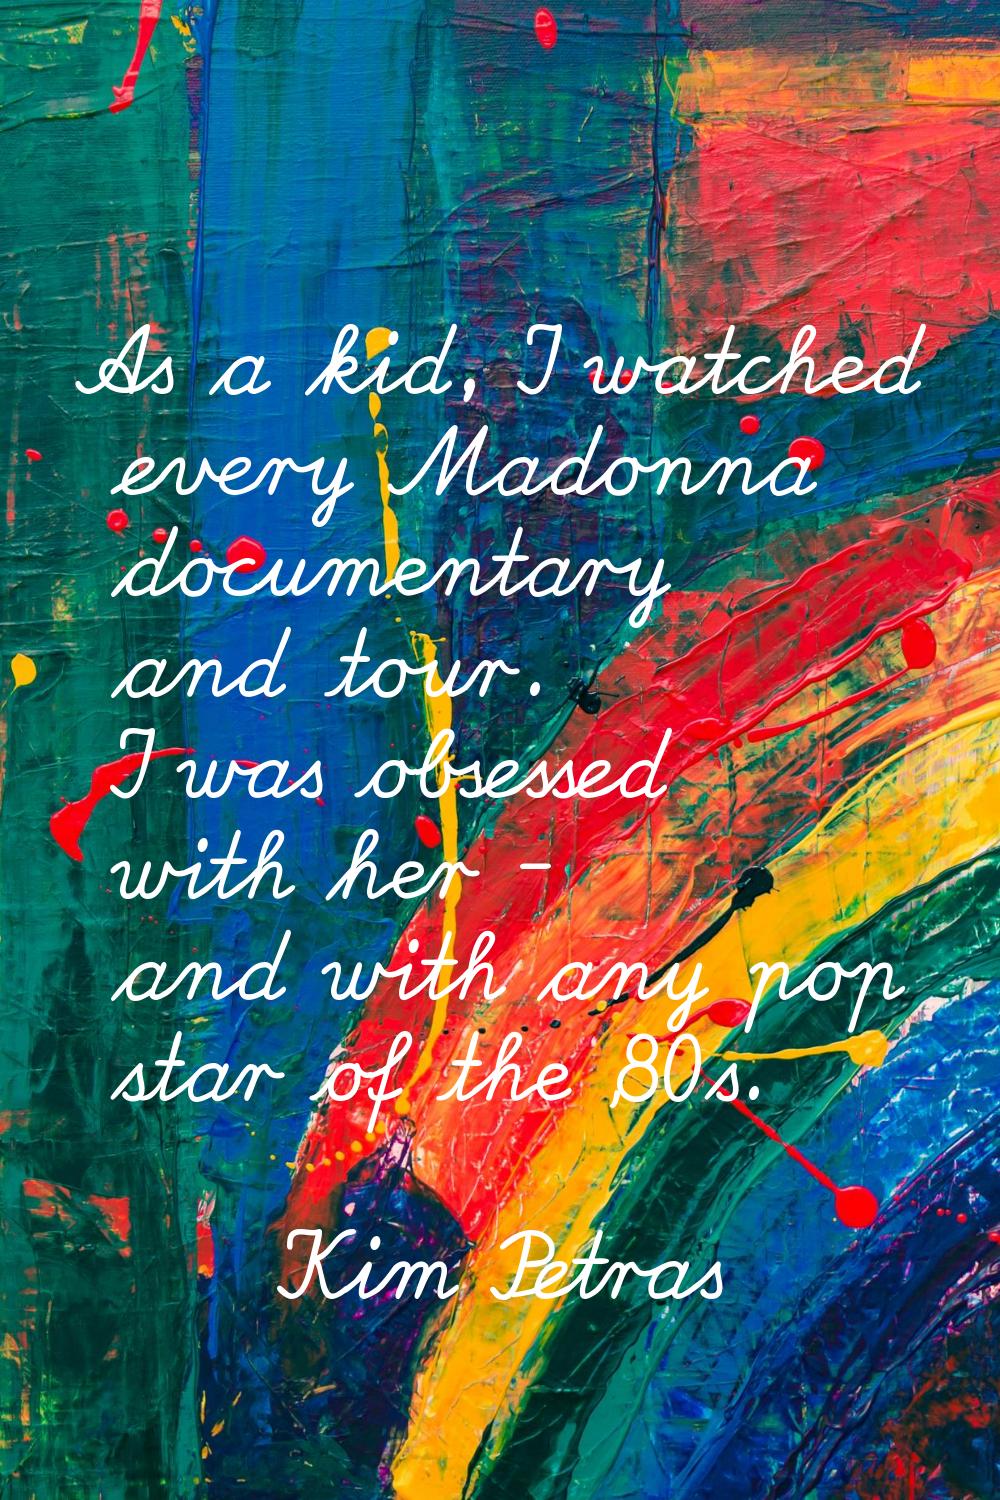 As a kid, I watched every Madonna documentary and tour. I was obsessed with her - and with any pop 